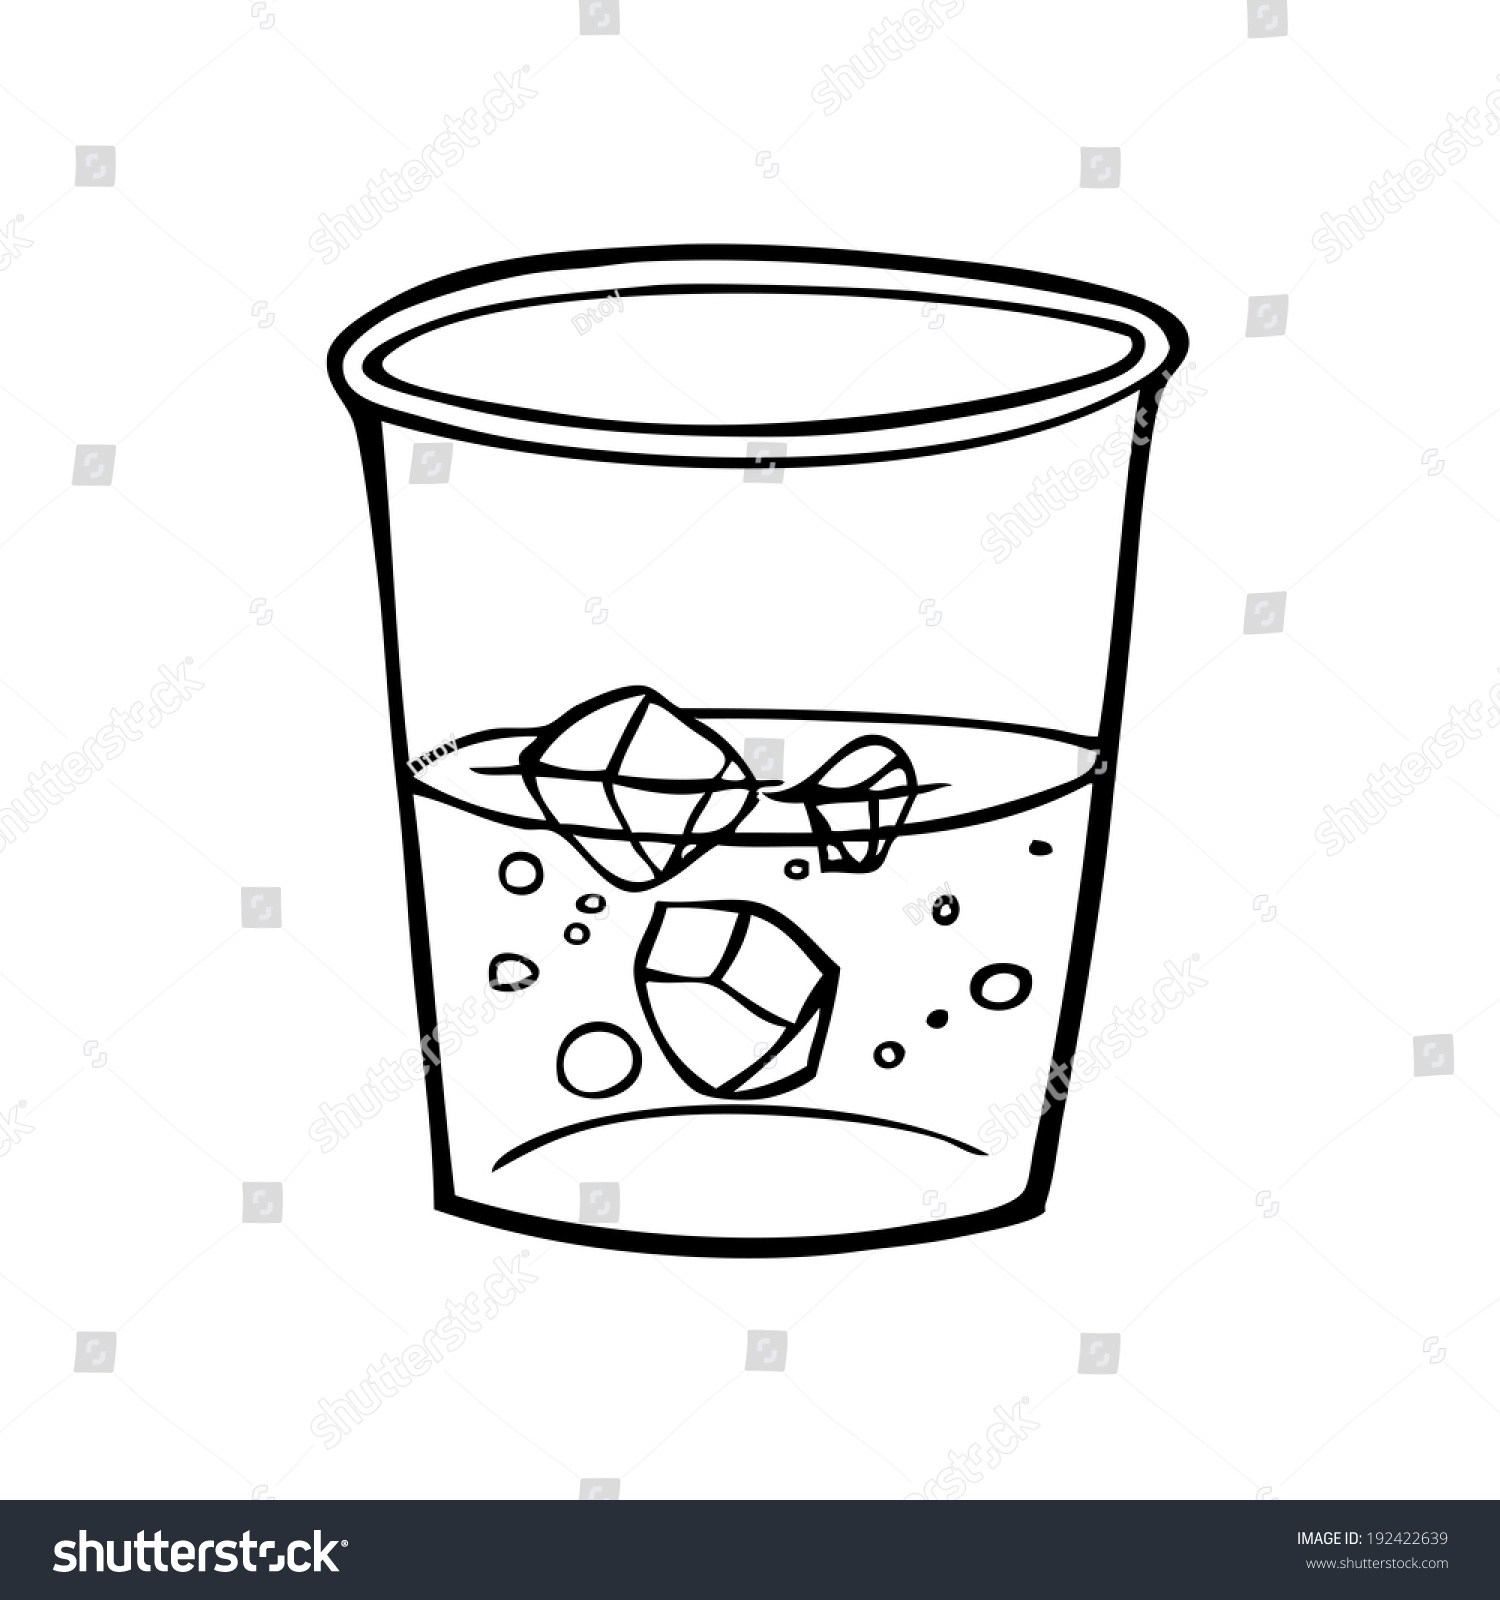 clipart of a glass of water - photo #38